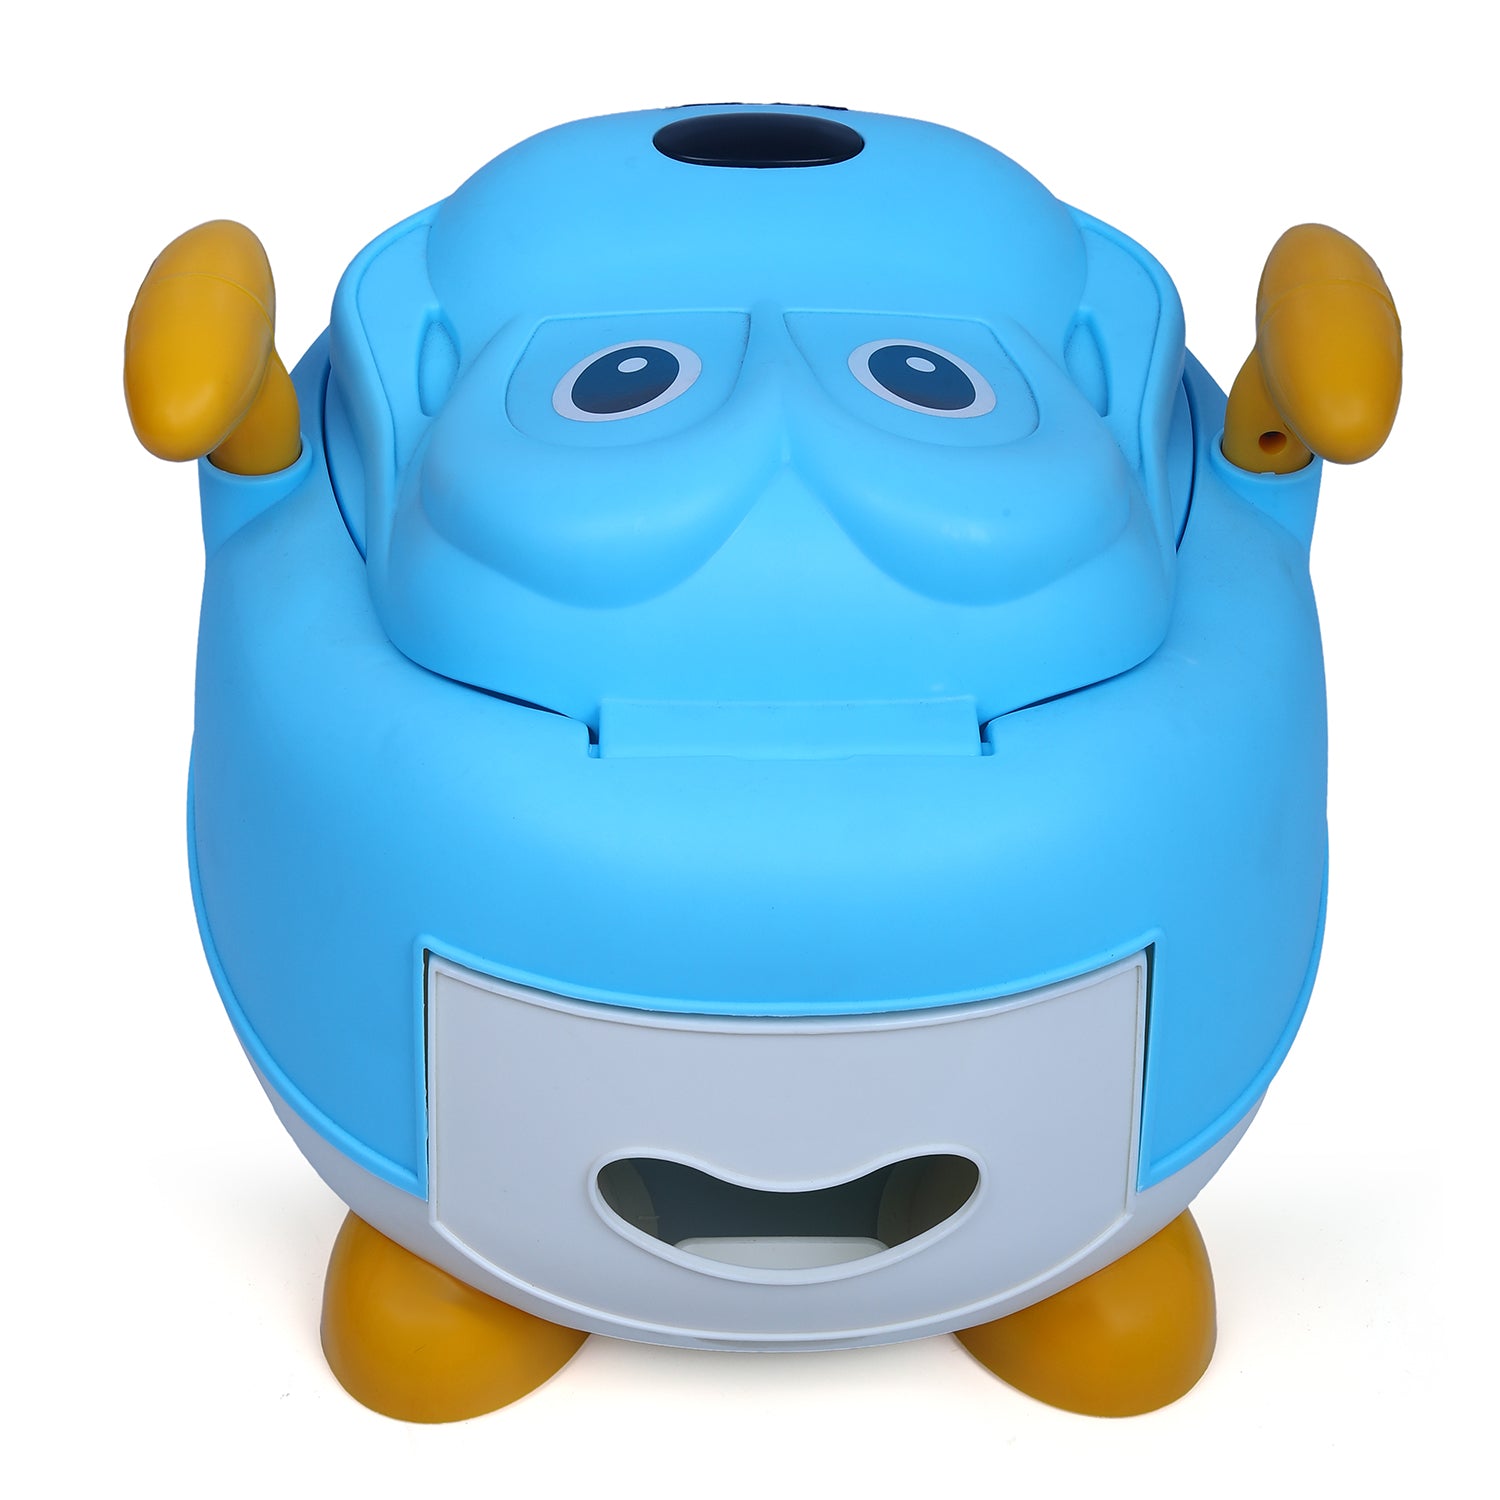 Baby Moo Puppy Detachable Bowl - Handle For Support Toilet Training Potty Chair - Blue